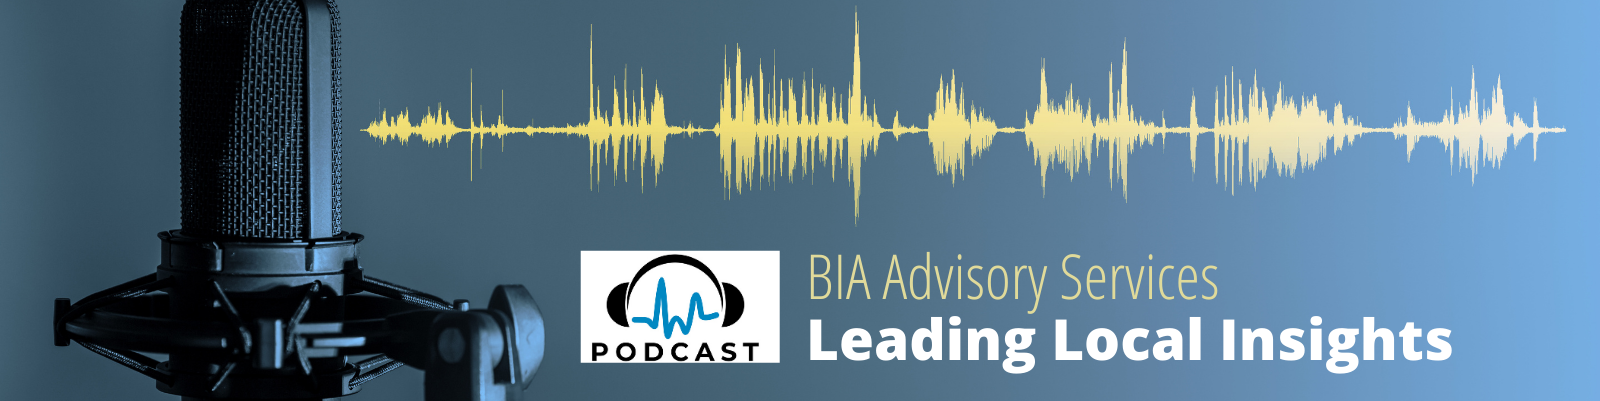 Catch Up On BIA’s Leading Local Insights Podcast